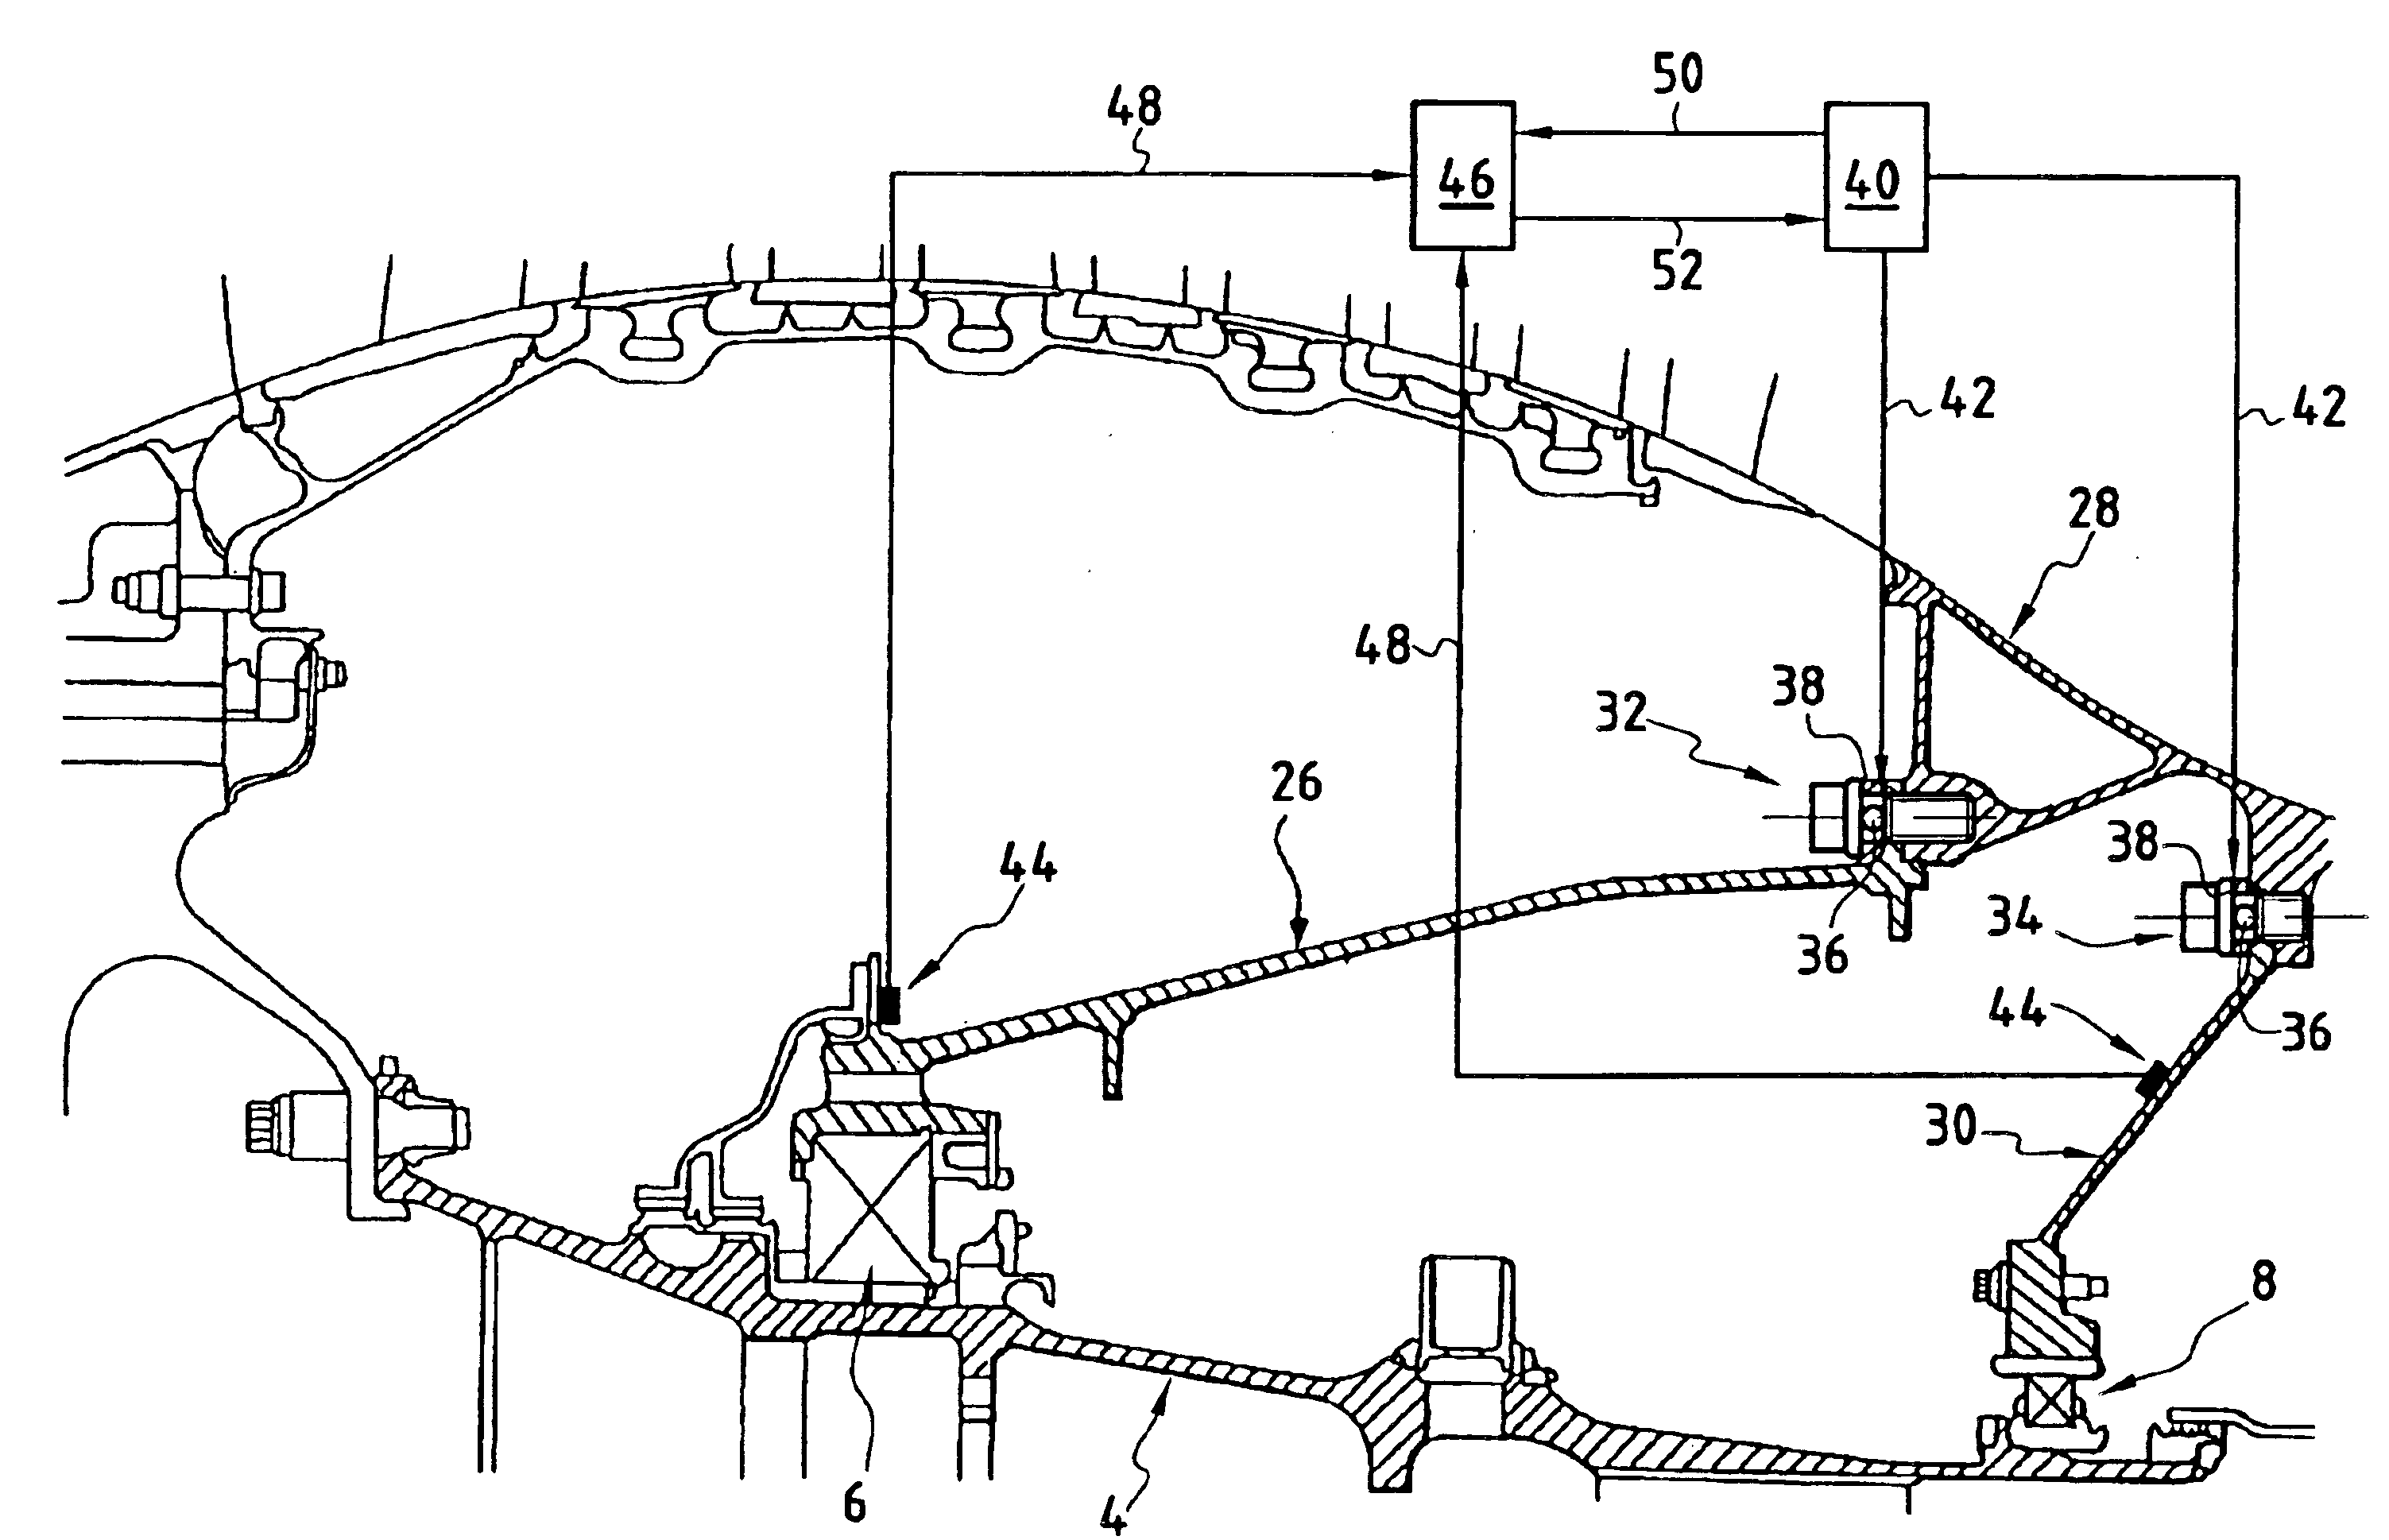 System for decoupling a fan from a turbojet by means of an explosive charge